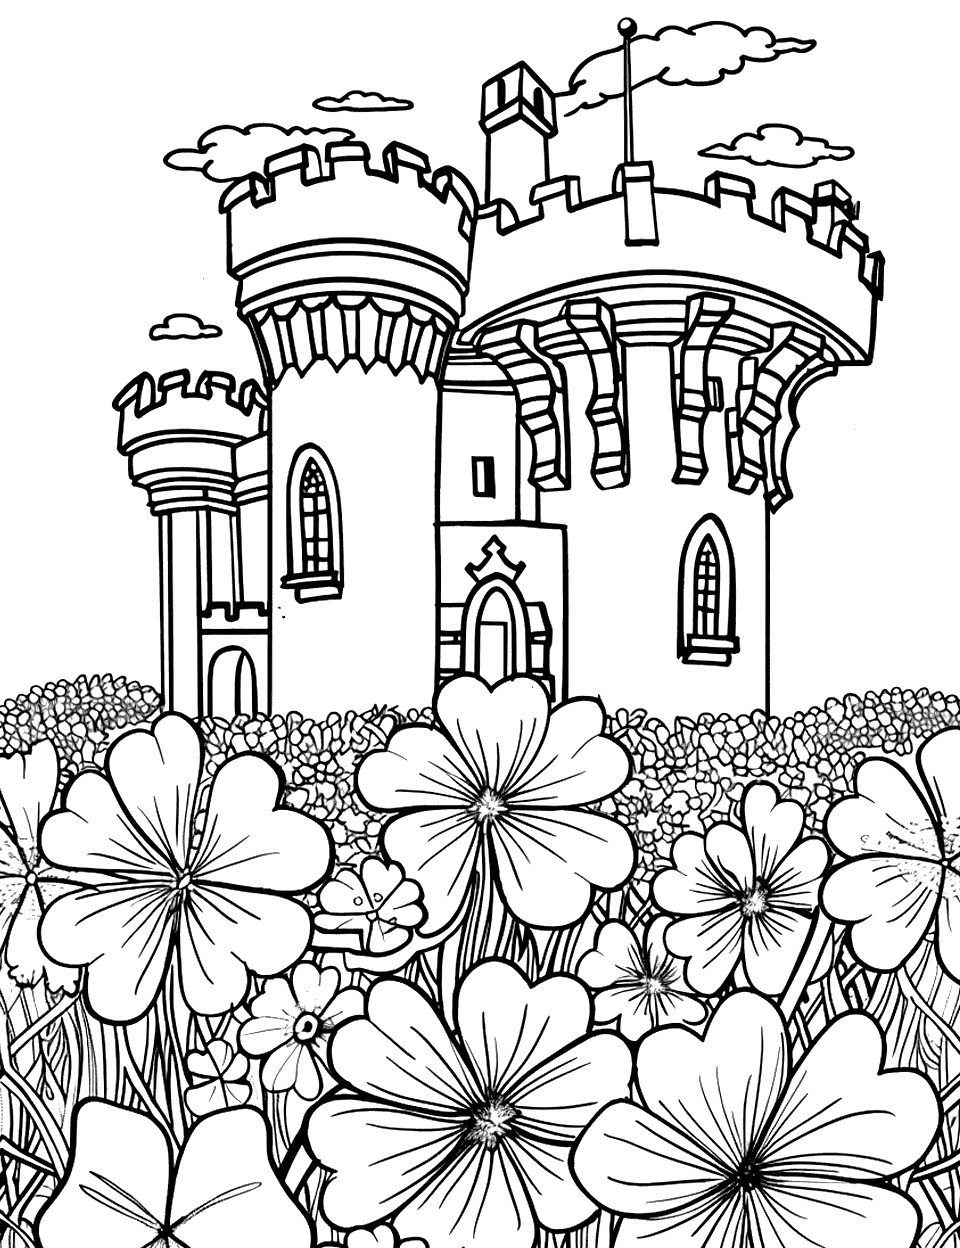 Irish Castle with Shamrock Gardens Coloring Page - An ancient Irish castle with sprawling gardens full of clovers.